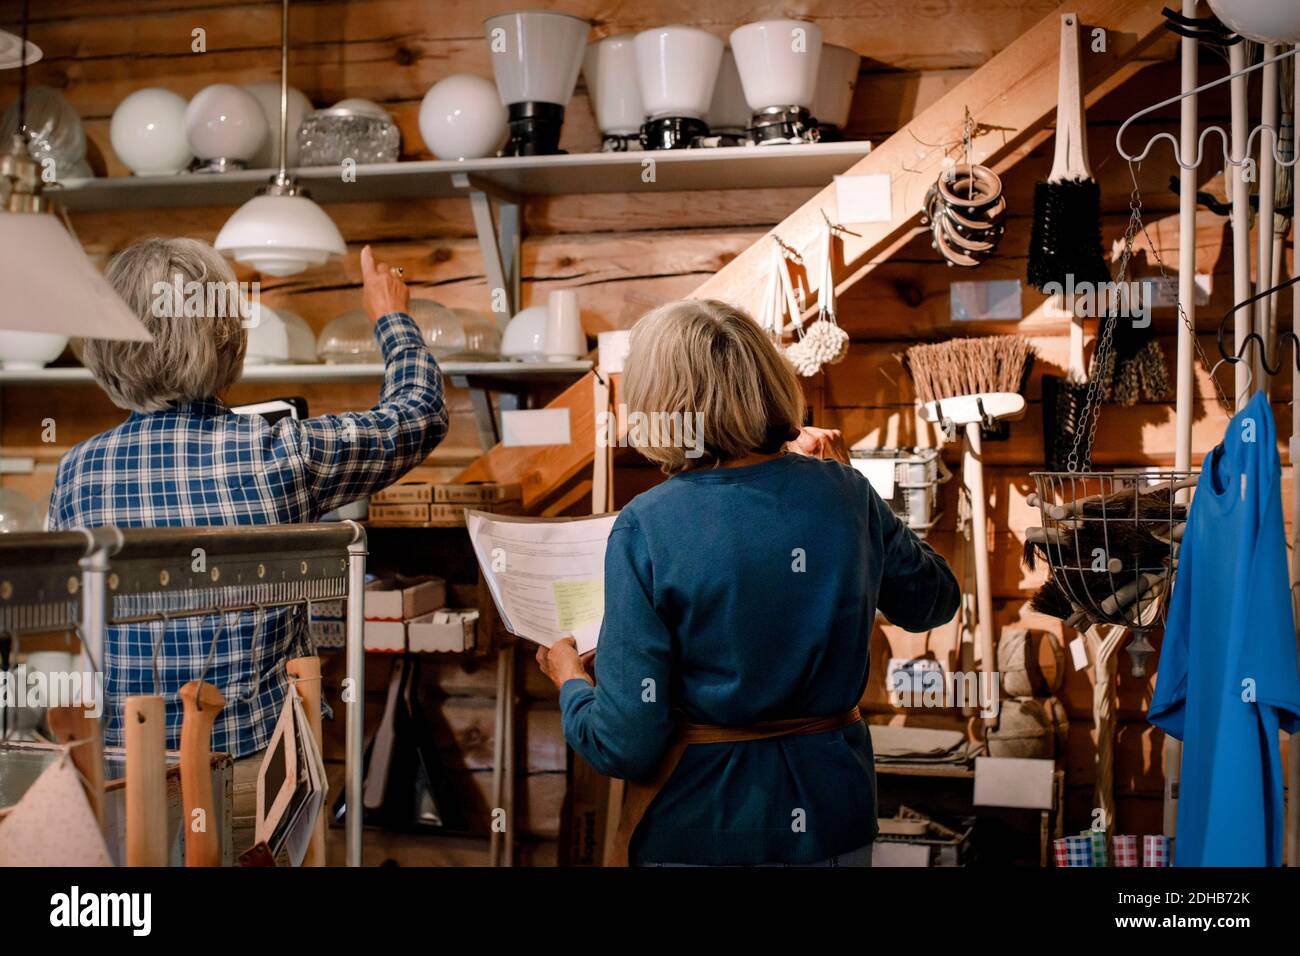 Rear view of female coworkers examining lighting equipment on shelves in hardware store Stock Photo